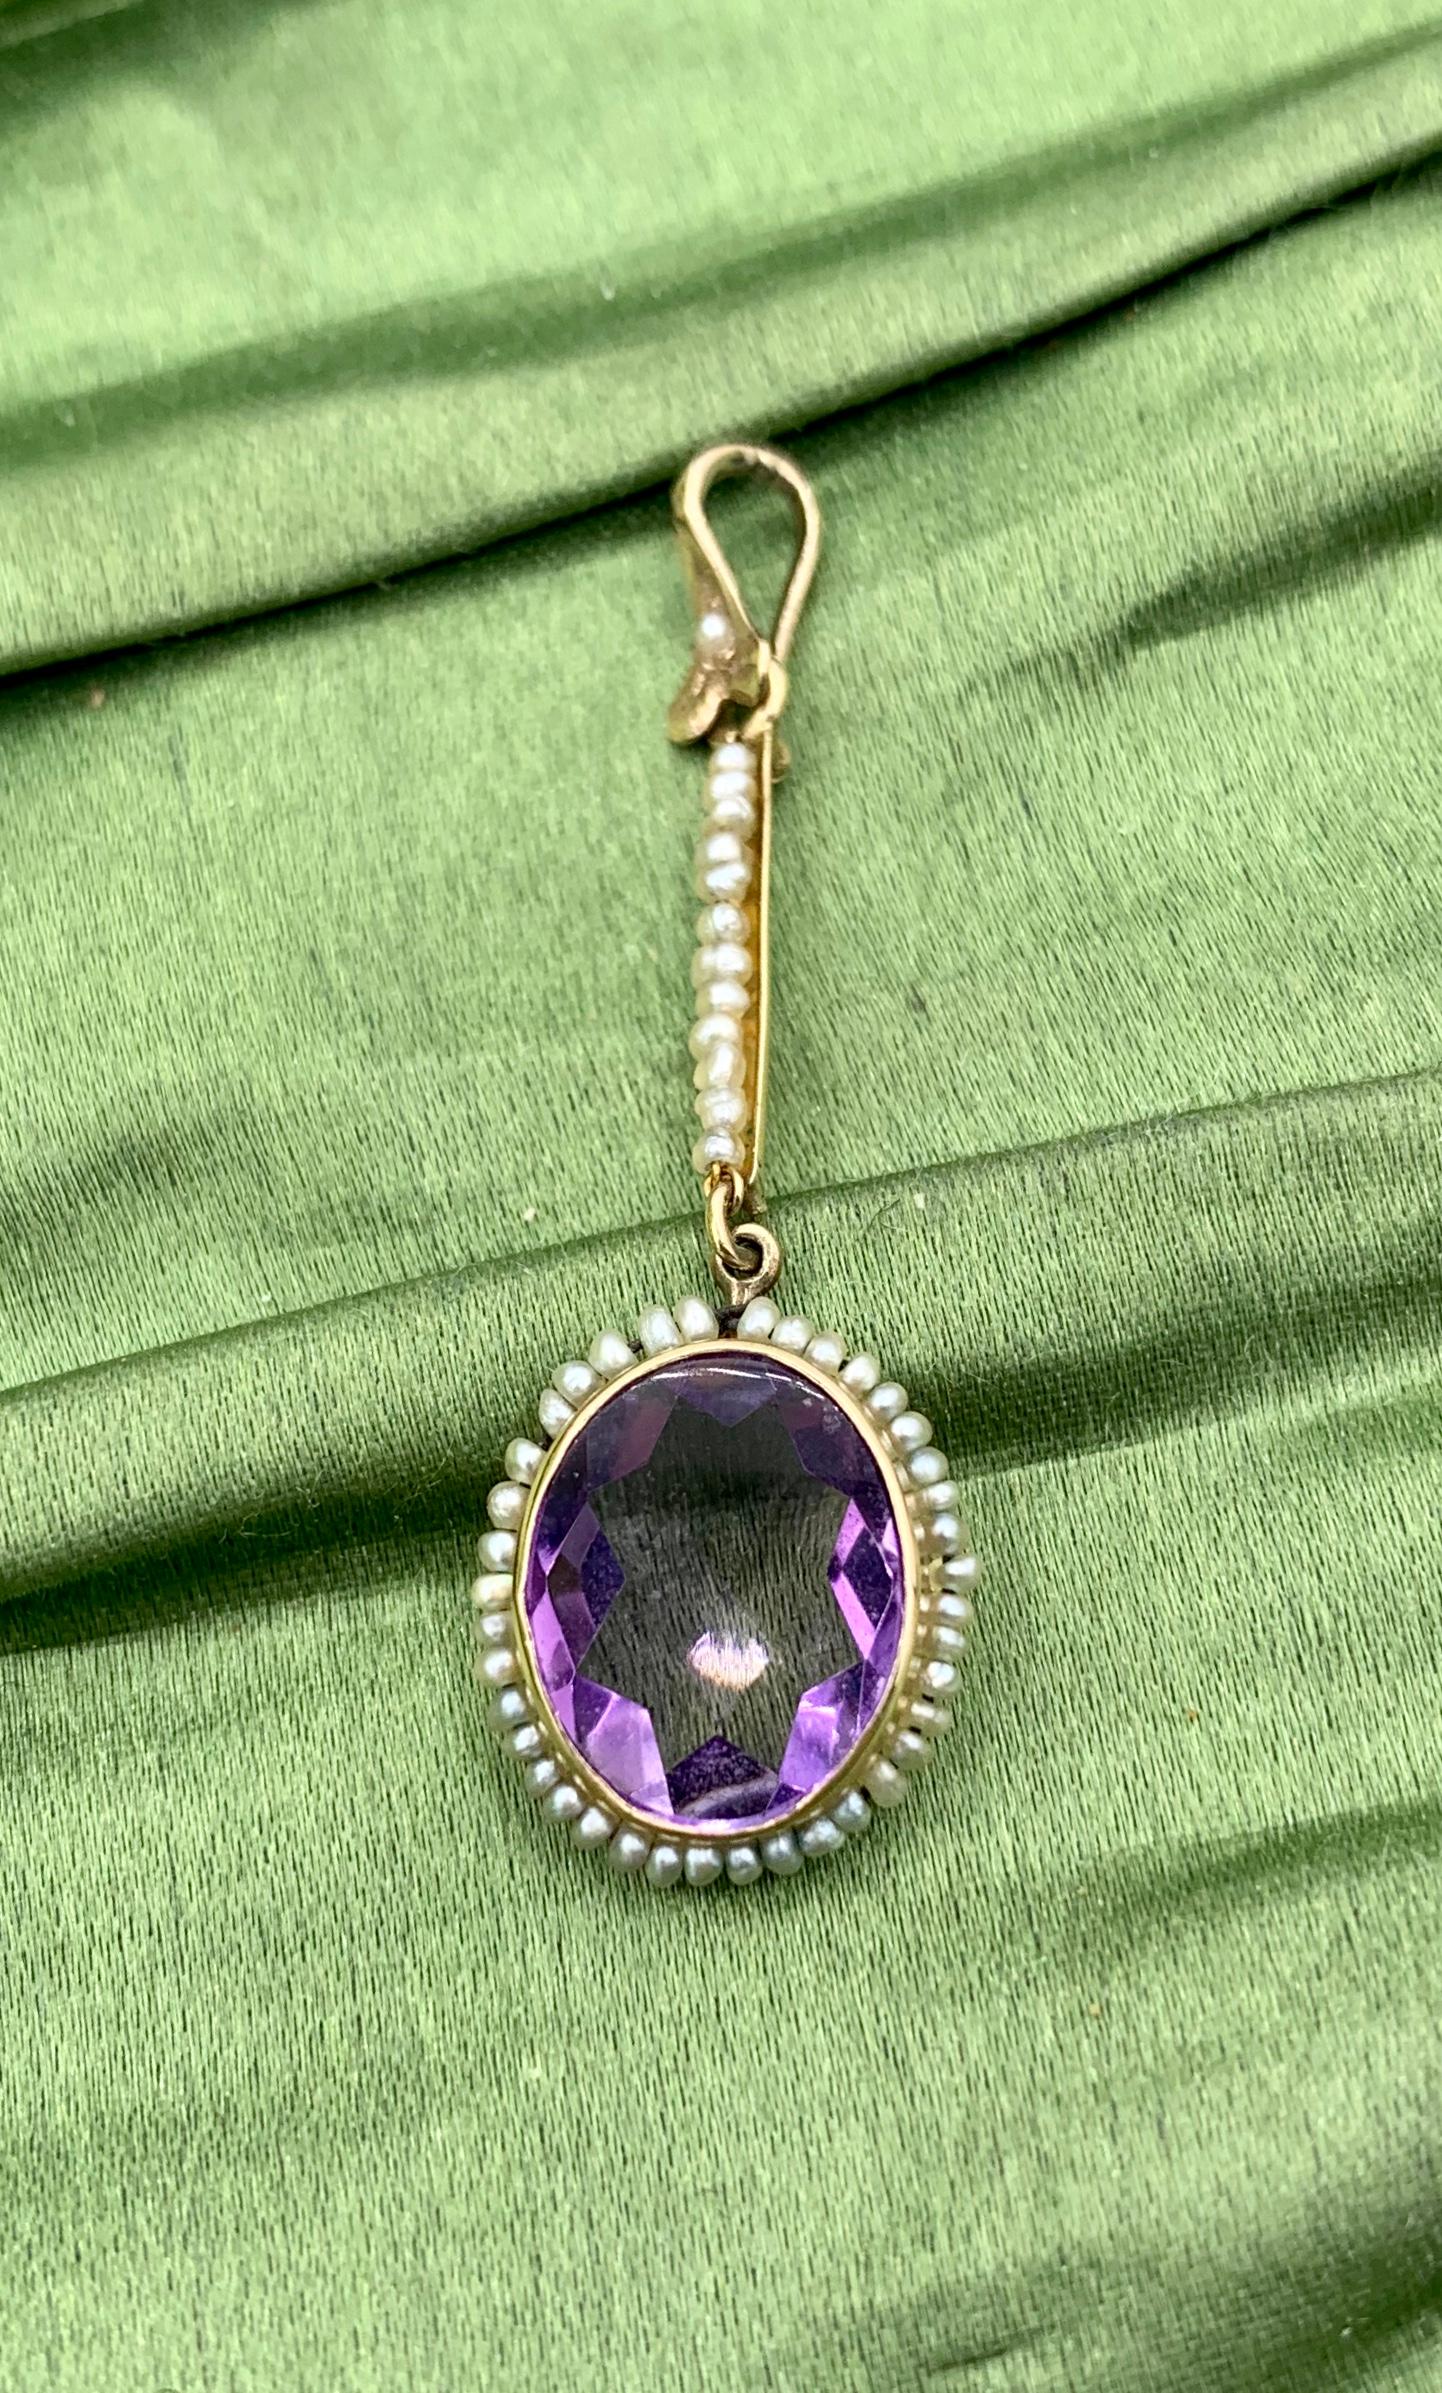 THIS IS A STUNNING EDWARDIAN AMETHYST PEARL LAVALIERE PENDANT WITH THE MOST GORGEOUS NATURAL OVAL FACETED TWO CARAT AMETHYST GEM SURROUNDED BY A HALO OF SEED PEARLS AND HANGING FROM A LONG ROW OF SEED PEARLS WITH A PEARL SET BALE.  THE LAVALIERE IS